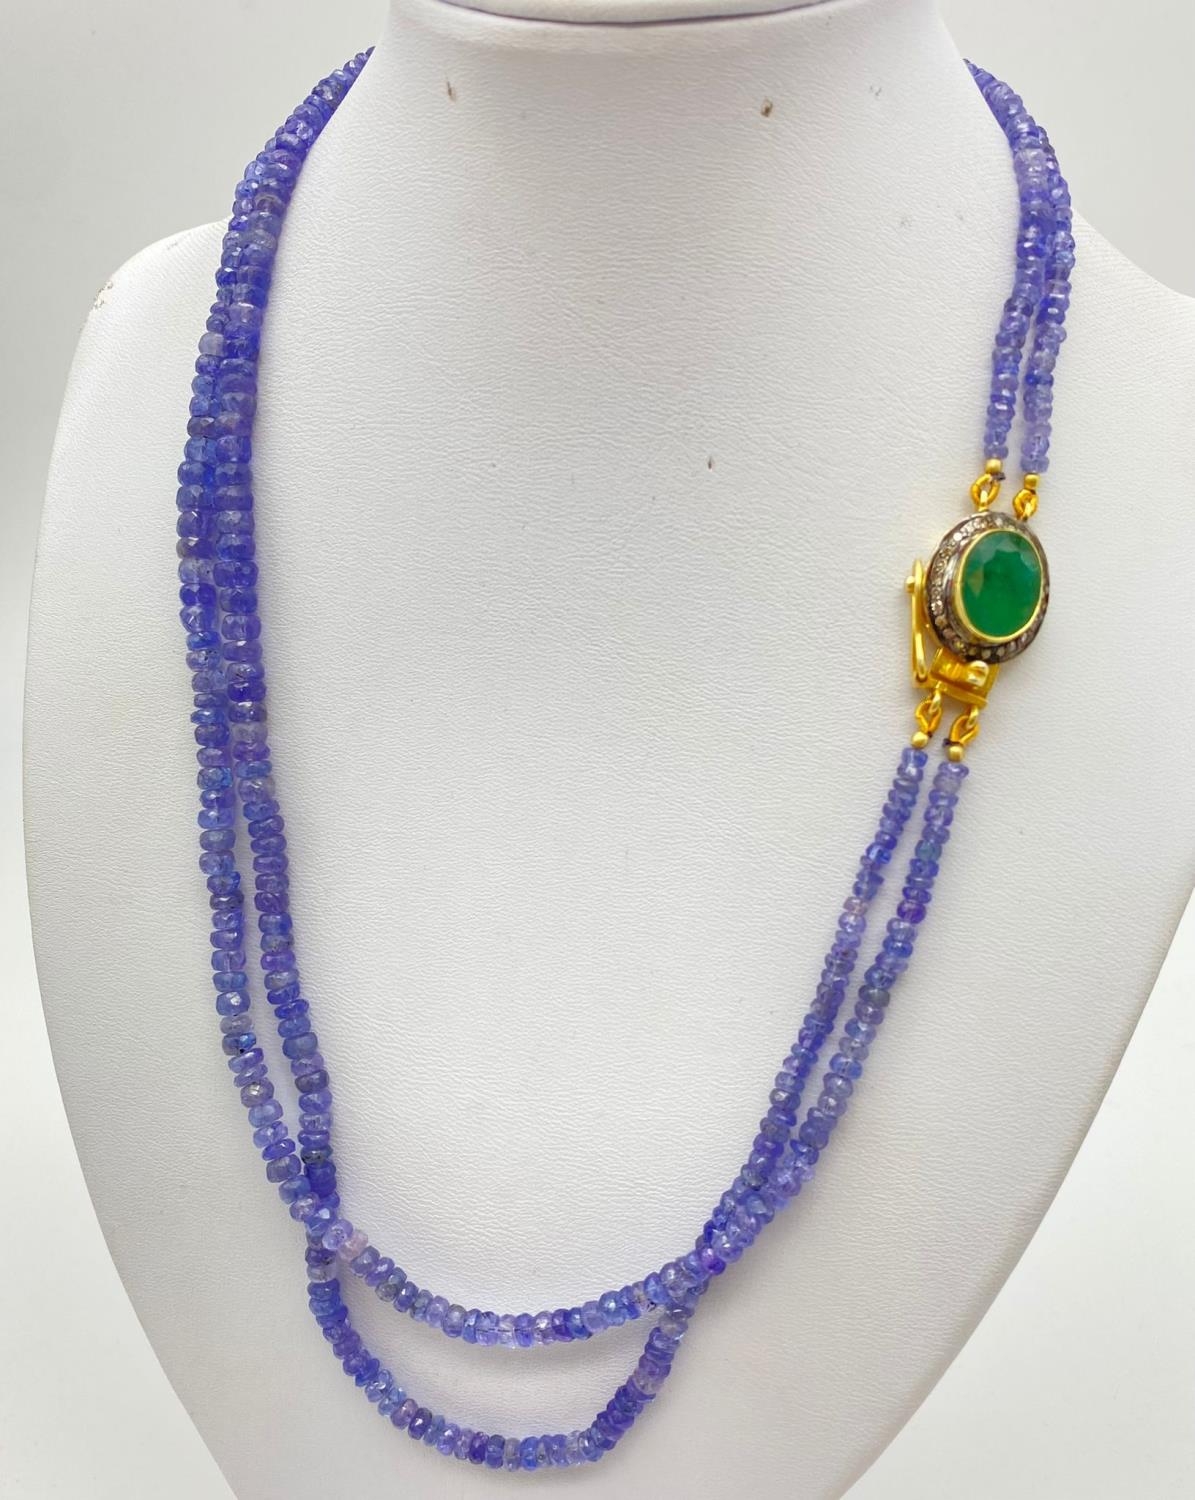 200cts Two-Row Tanzanite Gemstone Necklace with Emerald clasp circled with a halo of diamonds. 46cm - Image 2 of 3